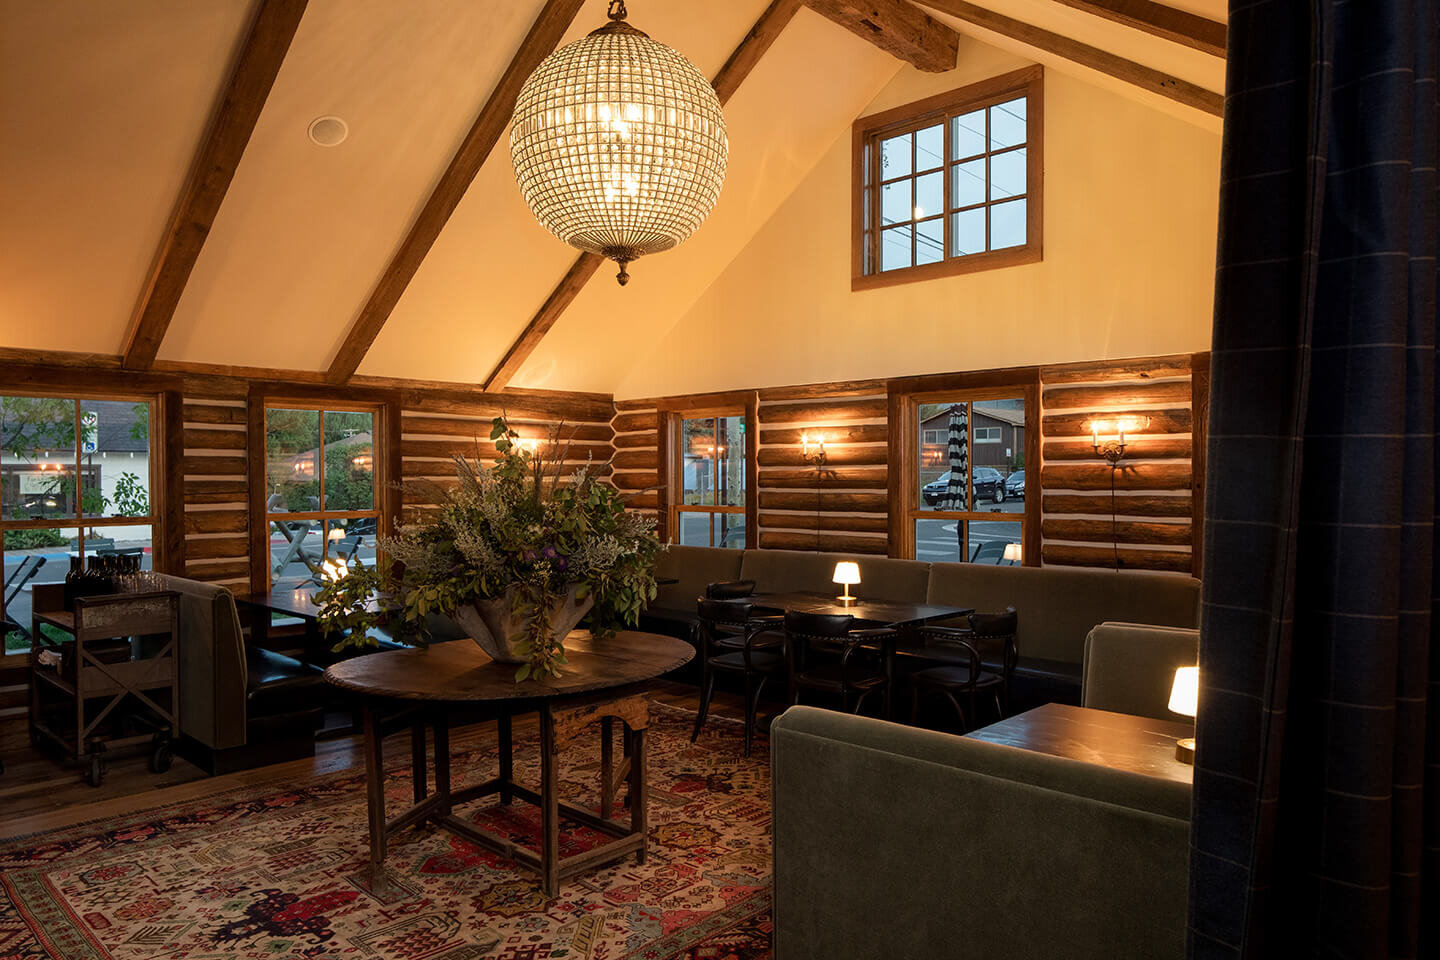 Restaurant dining room with beams and logs and a disco ball